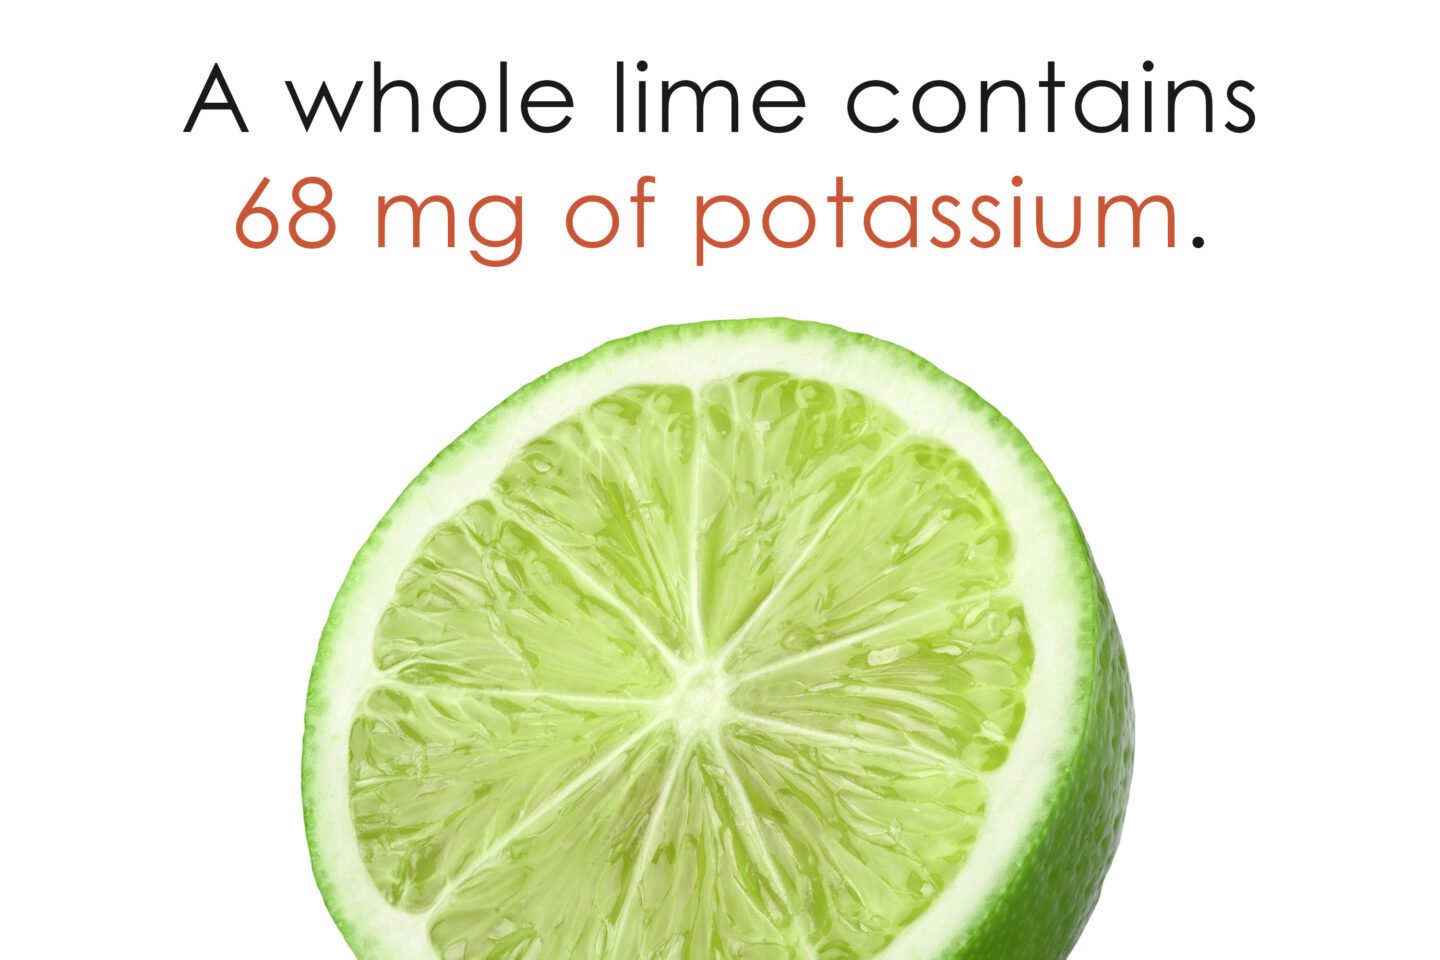 potassium in whole lime